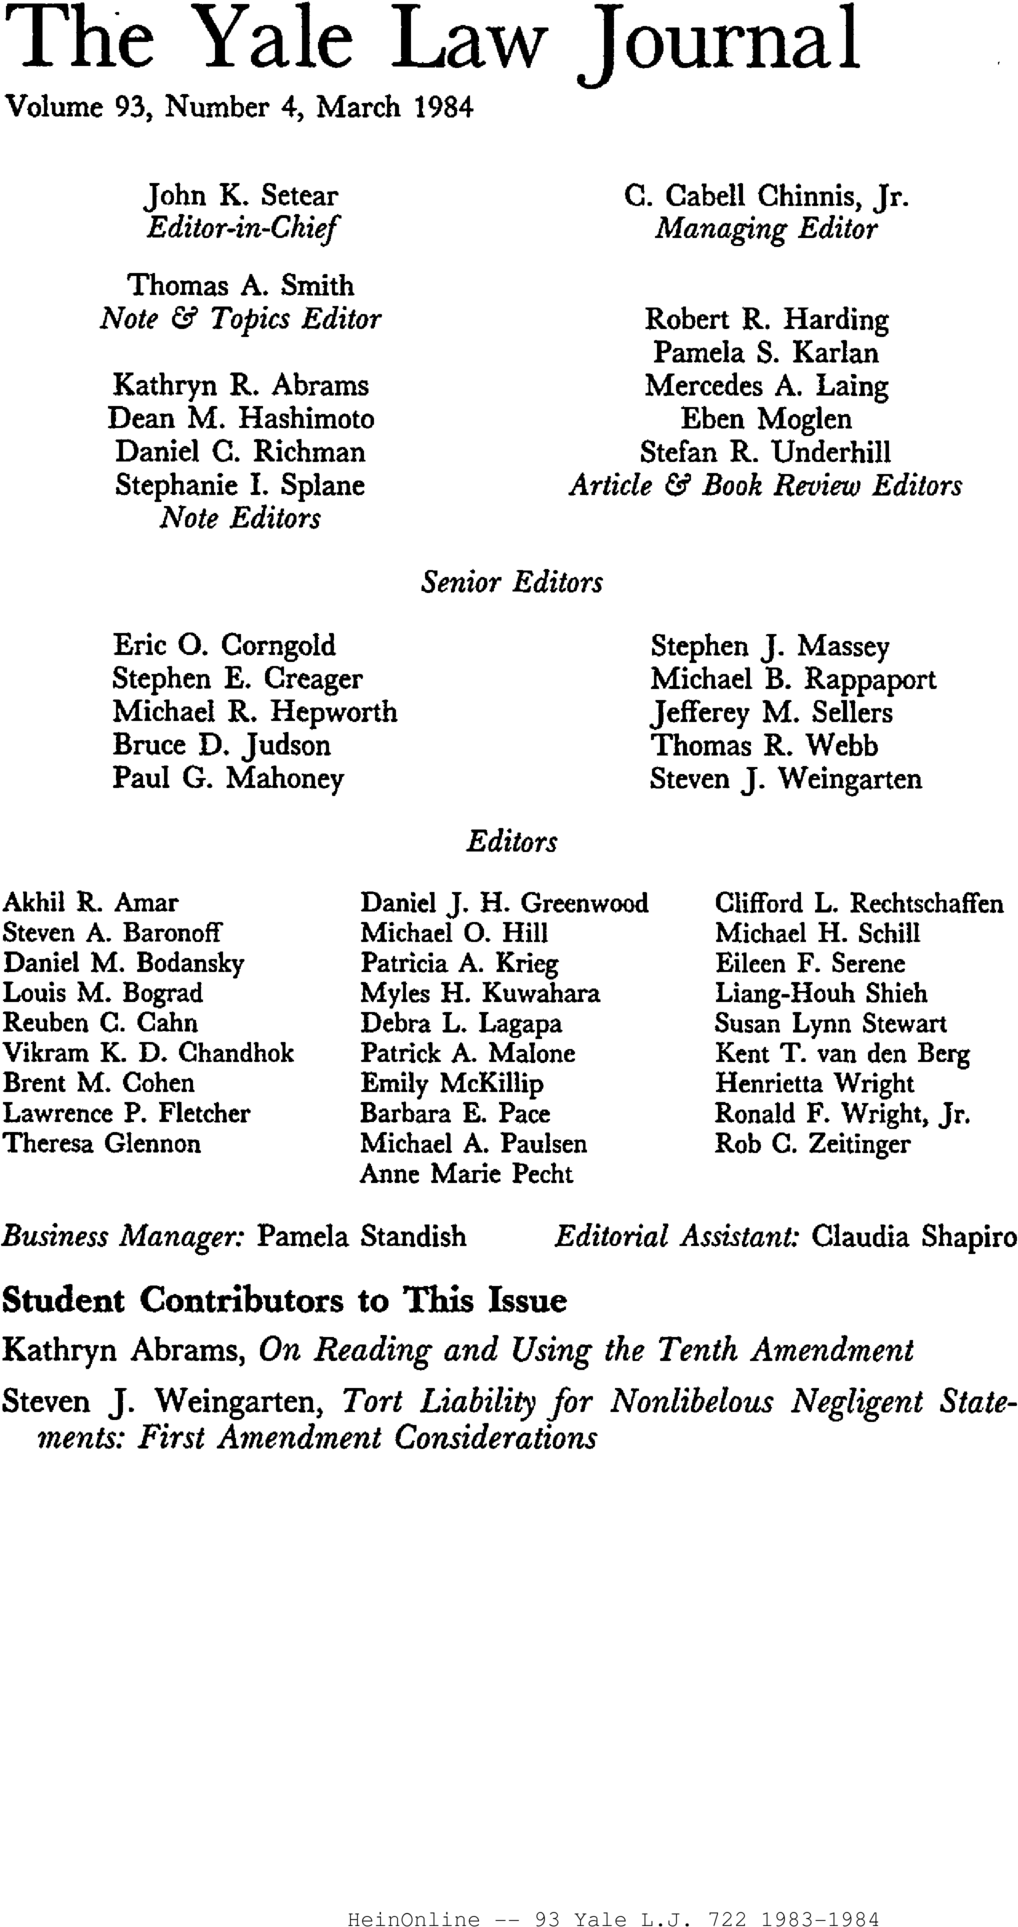 The Yale Law Journal Masthead Volume 93